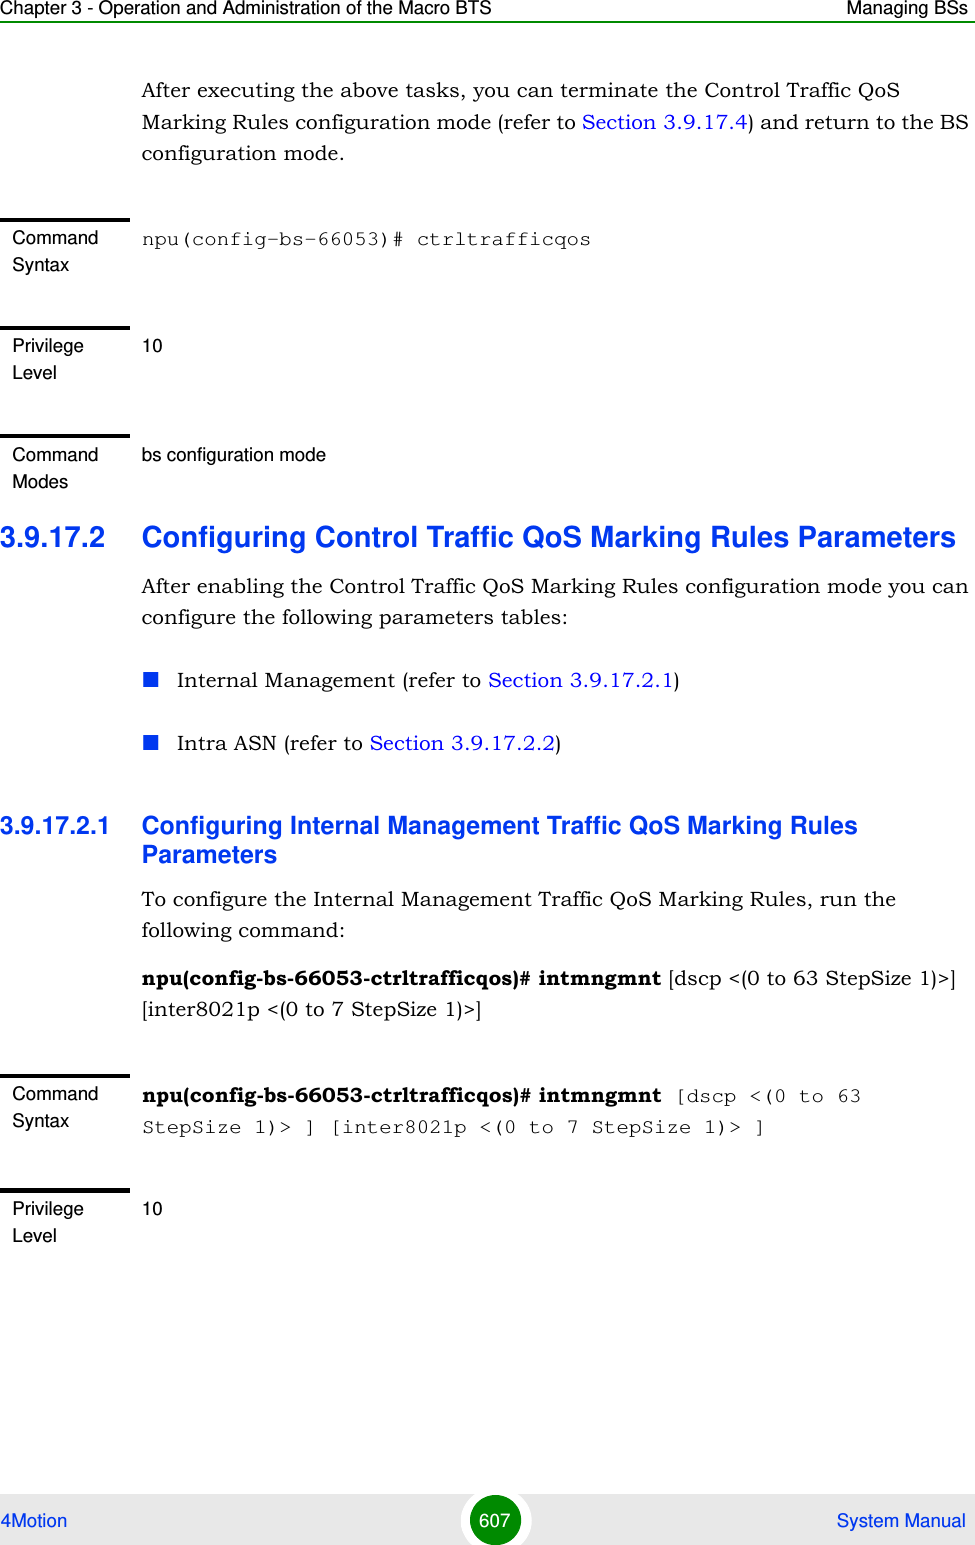 Chapter 3 - Operation and Administration of the Macro BTS Managing BSs4Motion 607  System ManualAfter executing the above tasks, you can terminate the Control Traffic QoS Marking Rules configuration mode (refer to Section 3.9.17.4) and return to the BS configuration mode.3.9.17.2 Configuring Control Traffic QoS Marking Rules ParametersAfter enabling the Control Traffic QoS Marking Rules configuration mode you can configure the following parameters tables:Internal Management (refer to Section 3.9.17.2.1)Intra ASN (refer to Section 3.9.17.2.2)3.9.17.2.1 Configuring Internal Management Traffic QoS Marking Rules ParametersTo configure the Internal Management Traffic QoS Marking Rules, run the following command:npu(config-bs-66053-ctrltrafficqos)# intmngmnt [dscp &lt;(0 to 63 StepSize 1)&gt;] [inter8021p &lt;(0 to 7 StepSize 1)&gt;]Command Syntaxnpu(config-bs-66053)# ctrltrafficqosPrivilege Level10Command Modesbs configuration modeCommand Syntaxnpu(config-bs-66053-ctrltrafficqos)# intmngmnt [dscp &lt;(0 to 63 StepSize 1)&gt; ] [inter8021p &lt;(0 to 7 StepSize 1)&gt; ]Privilege Level10